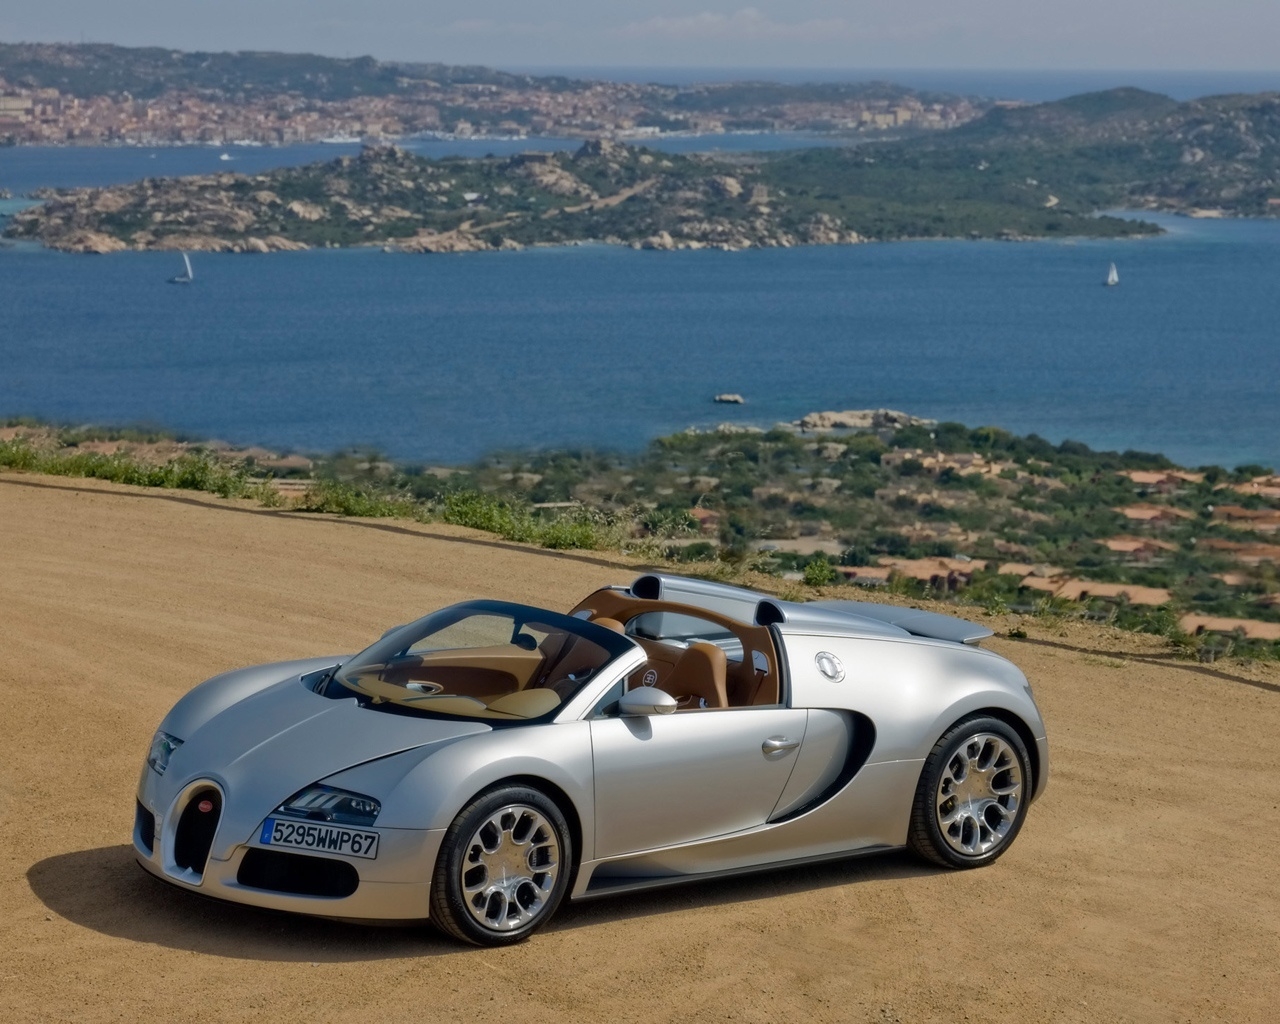 Bugatti Veyron 16.4 Grand Sport 2010 in Sardinia - Front And Side Panorama for 1280 x 1024 resolution